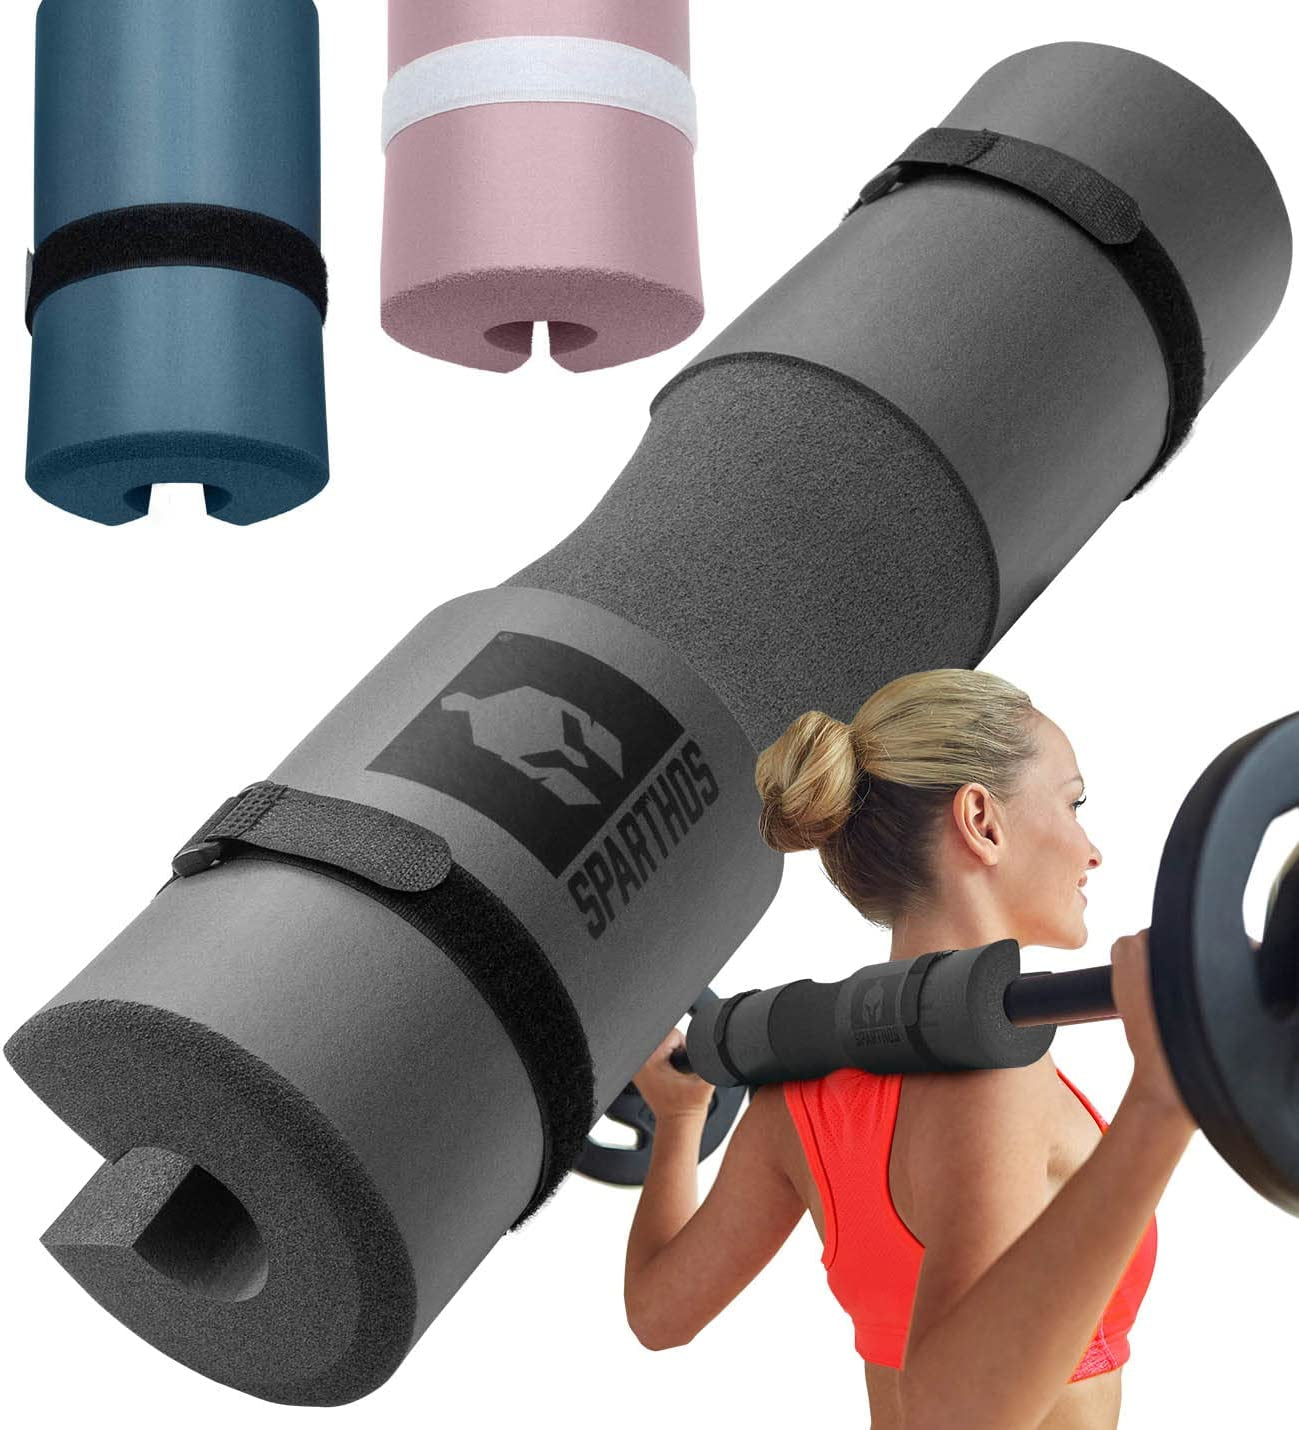 Barbell Pad For Squats, Lunges, Hip Thrusts & More